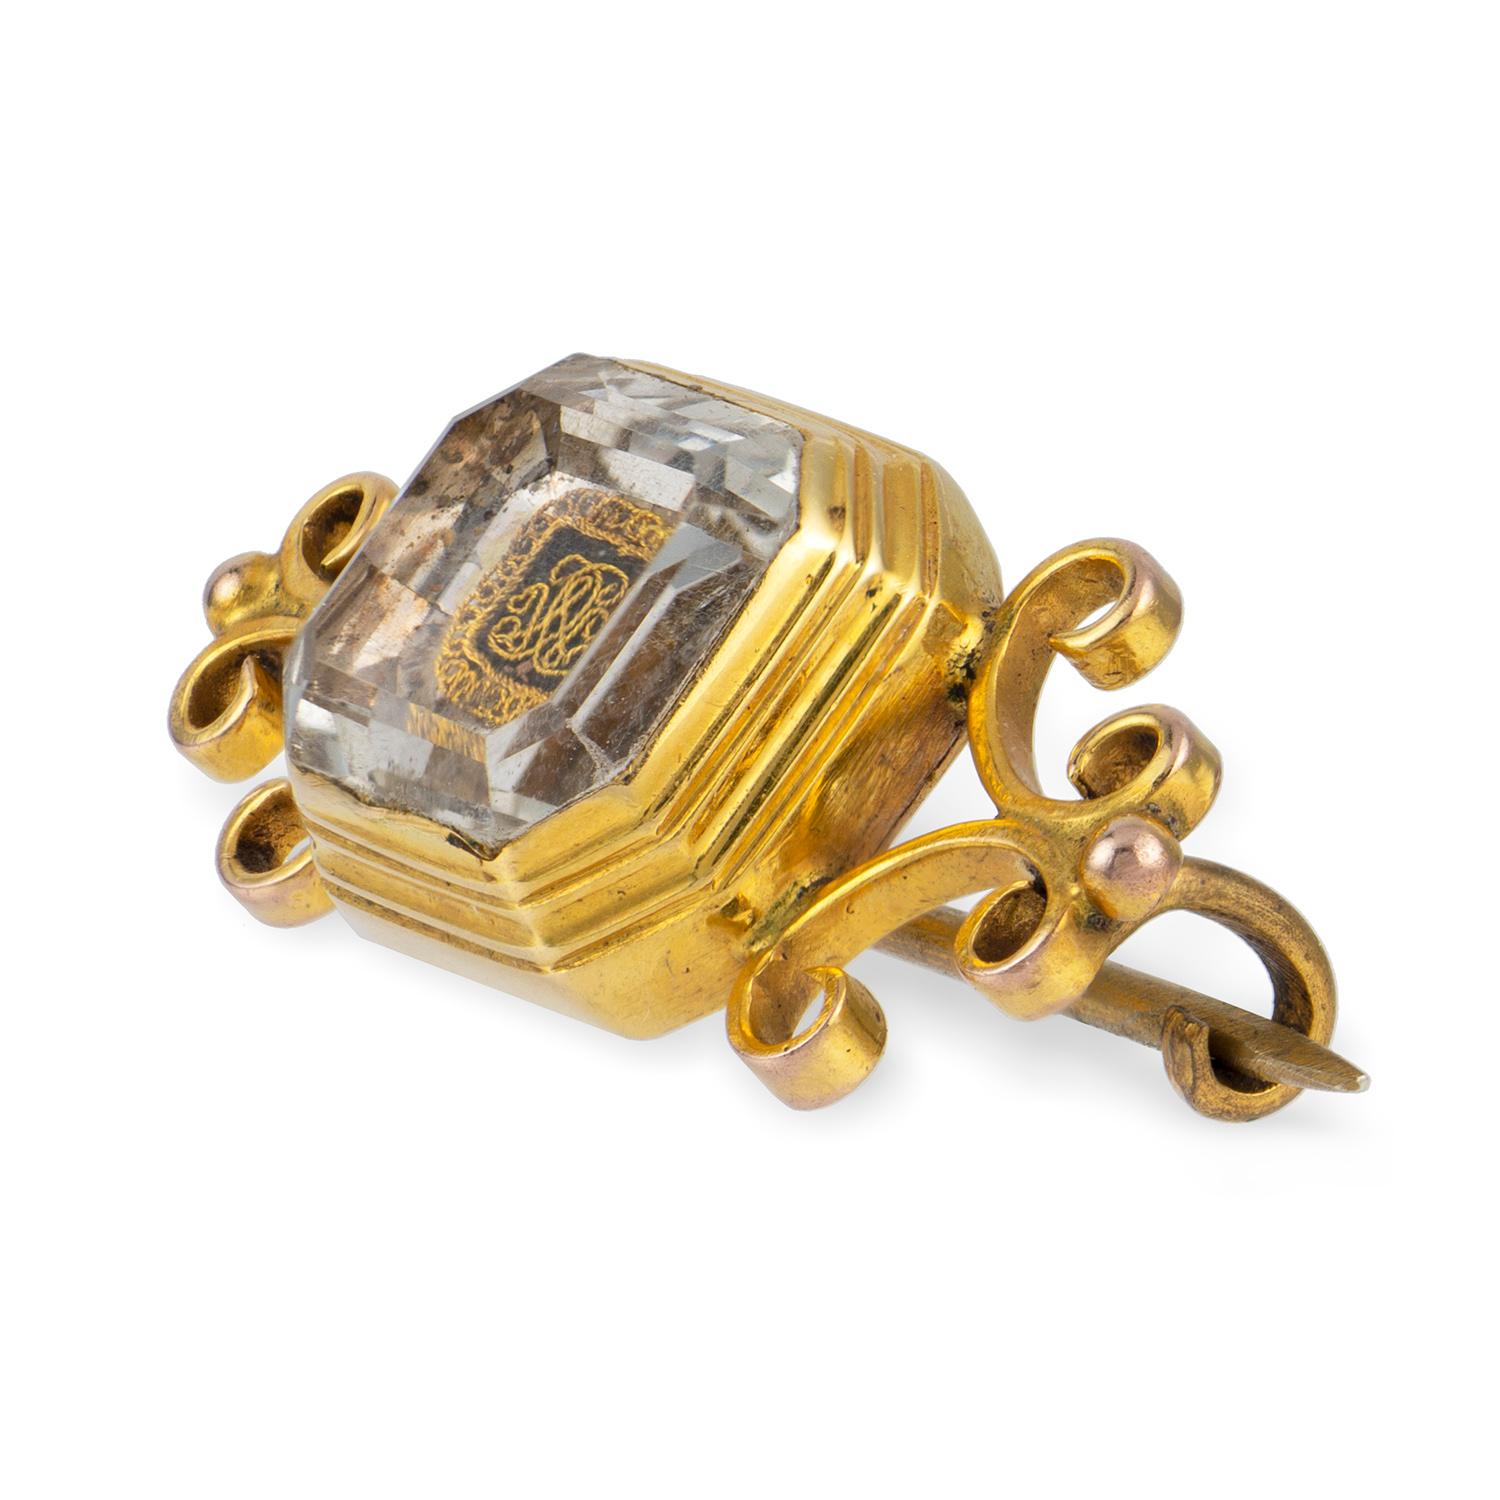 A Stuart crystal and gold brooch, the octagonal faceted crystal with a gold cypher to the back, the reversed cypher with the initials CWC surrounded by a twisted ribbon-like gold-wire decoration that symbolises the eternal love, all in a closed-back